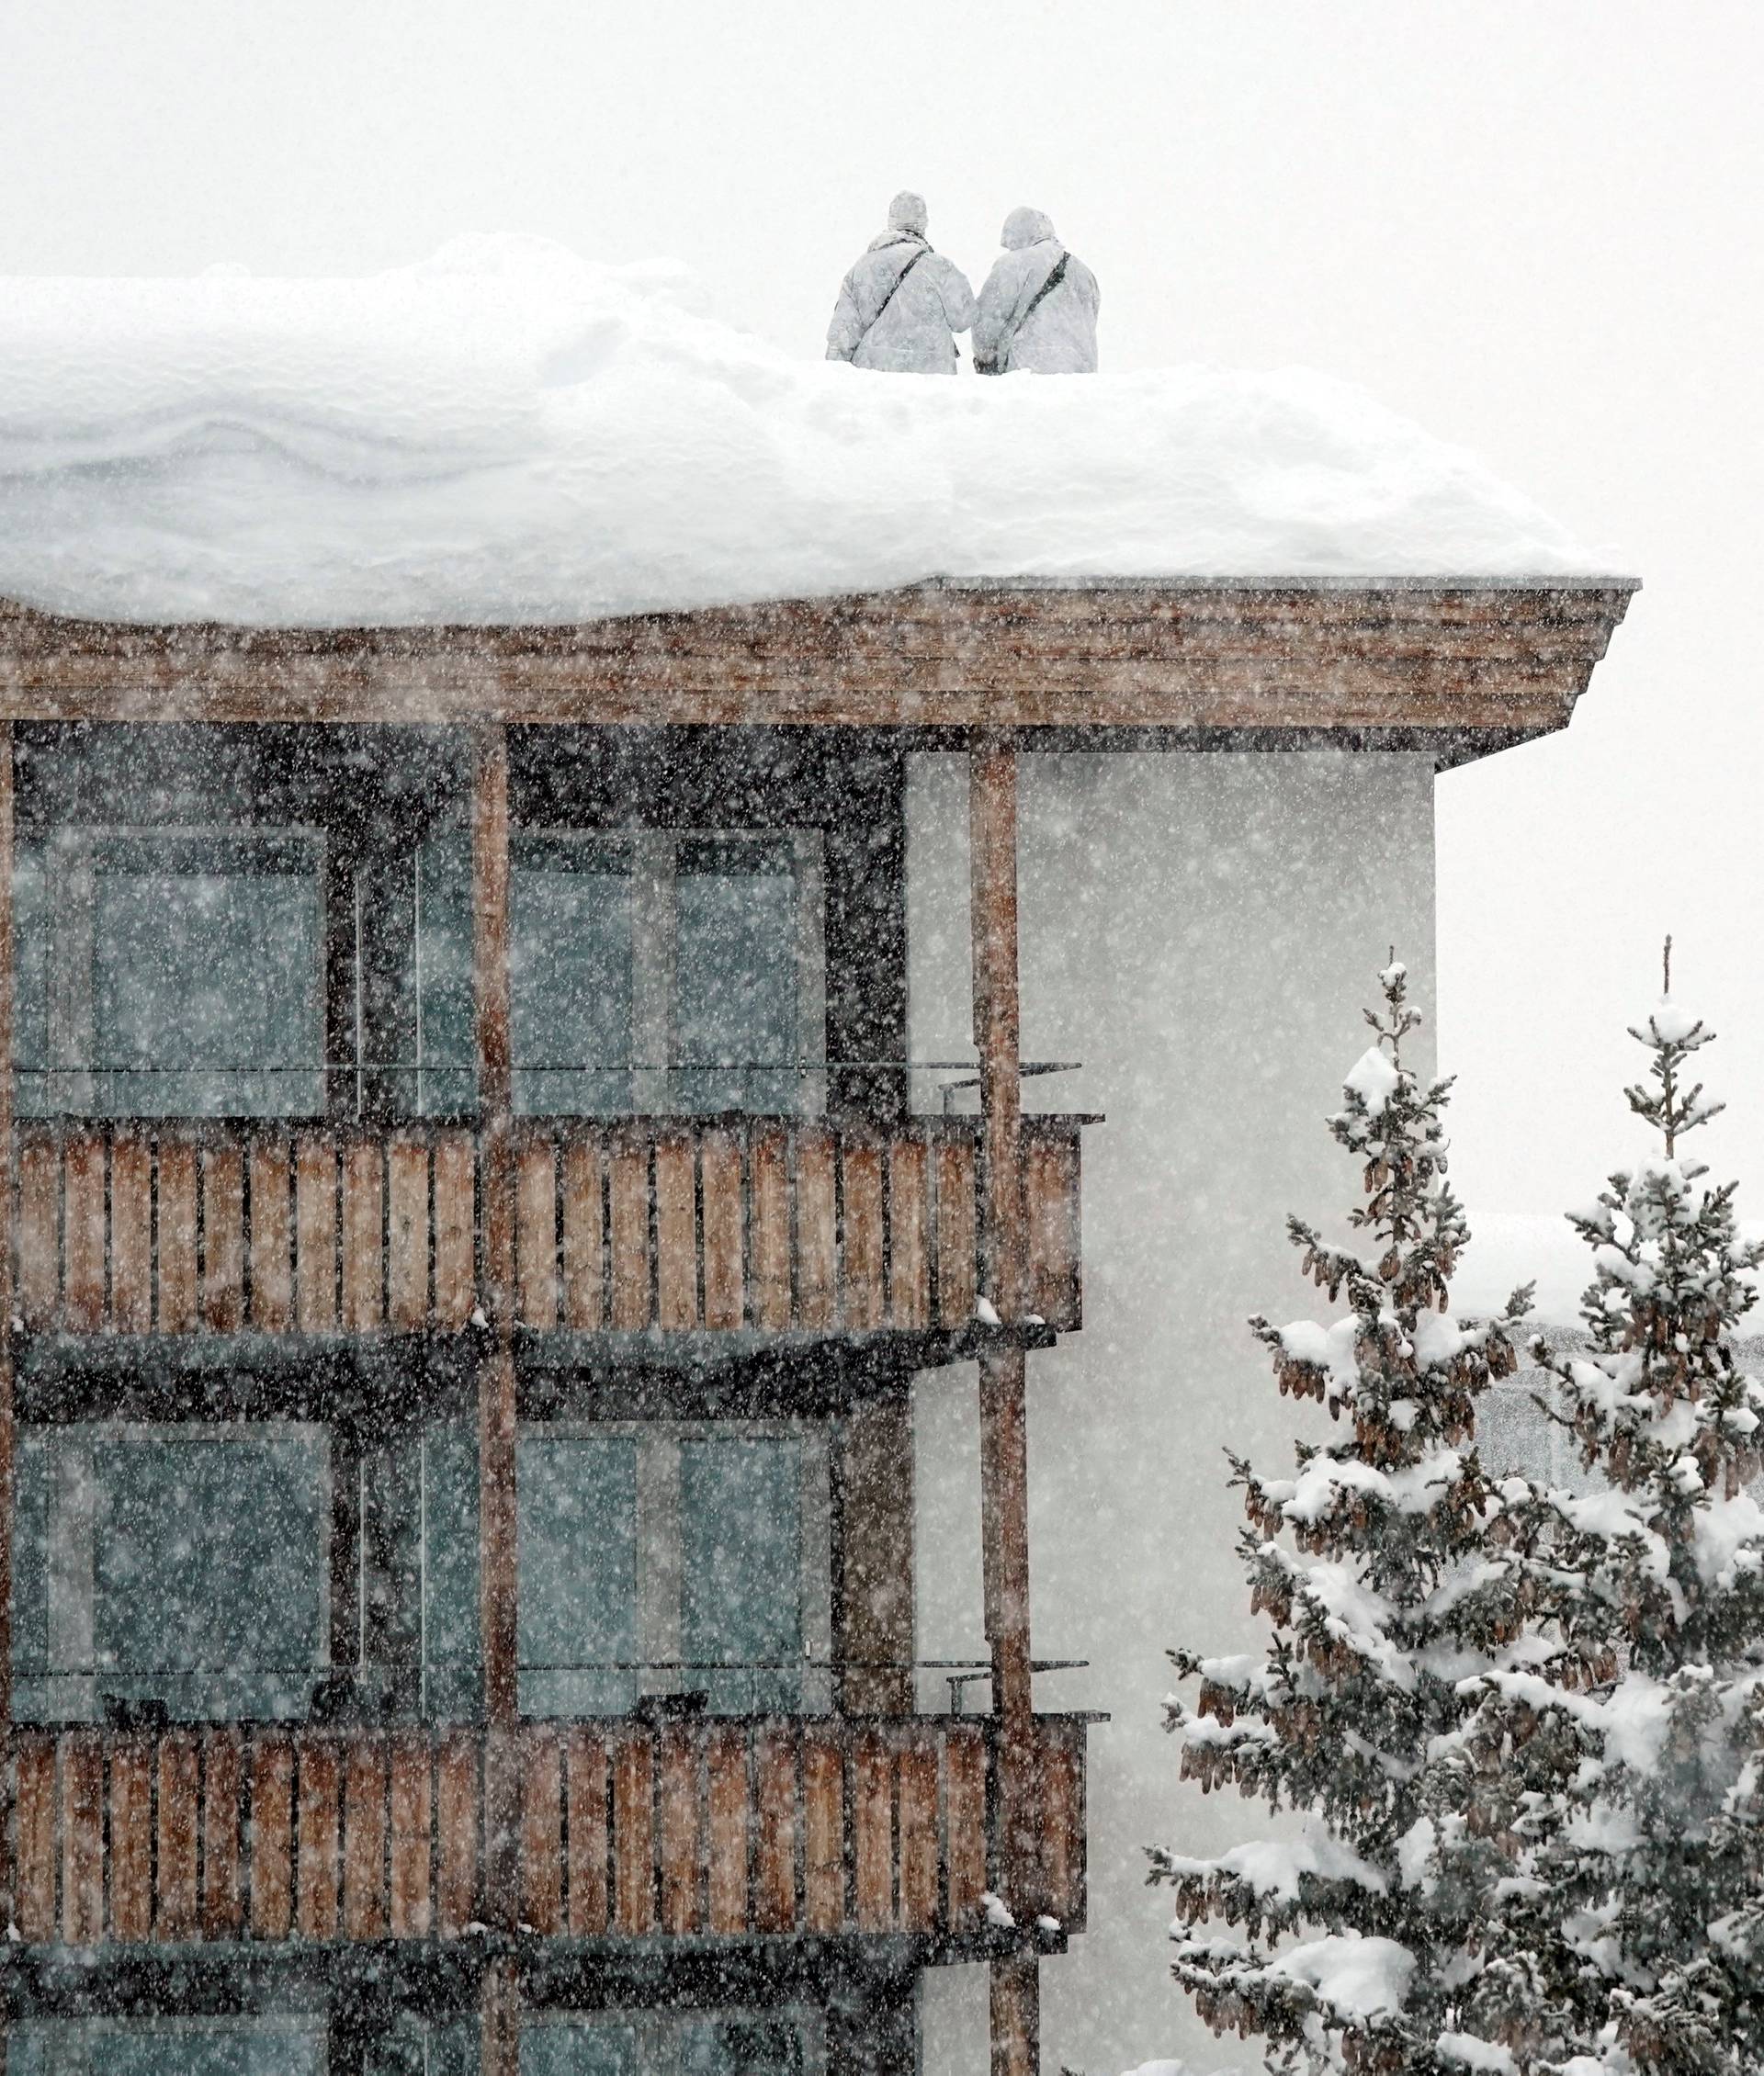 Snipers hold their position on the roof of a hotel during the WEF annual meeting in Davos